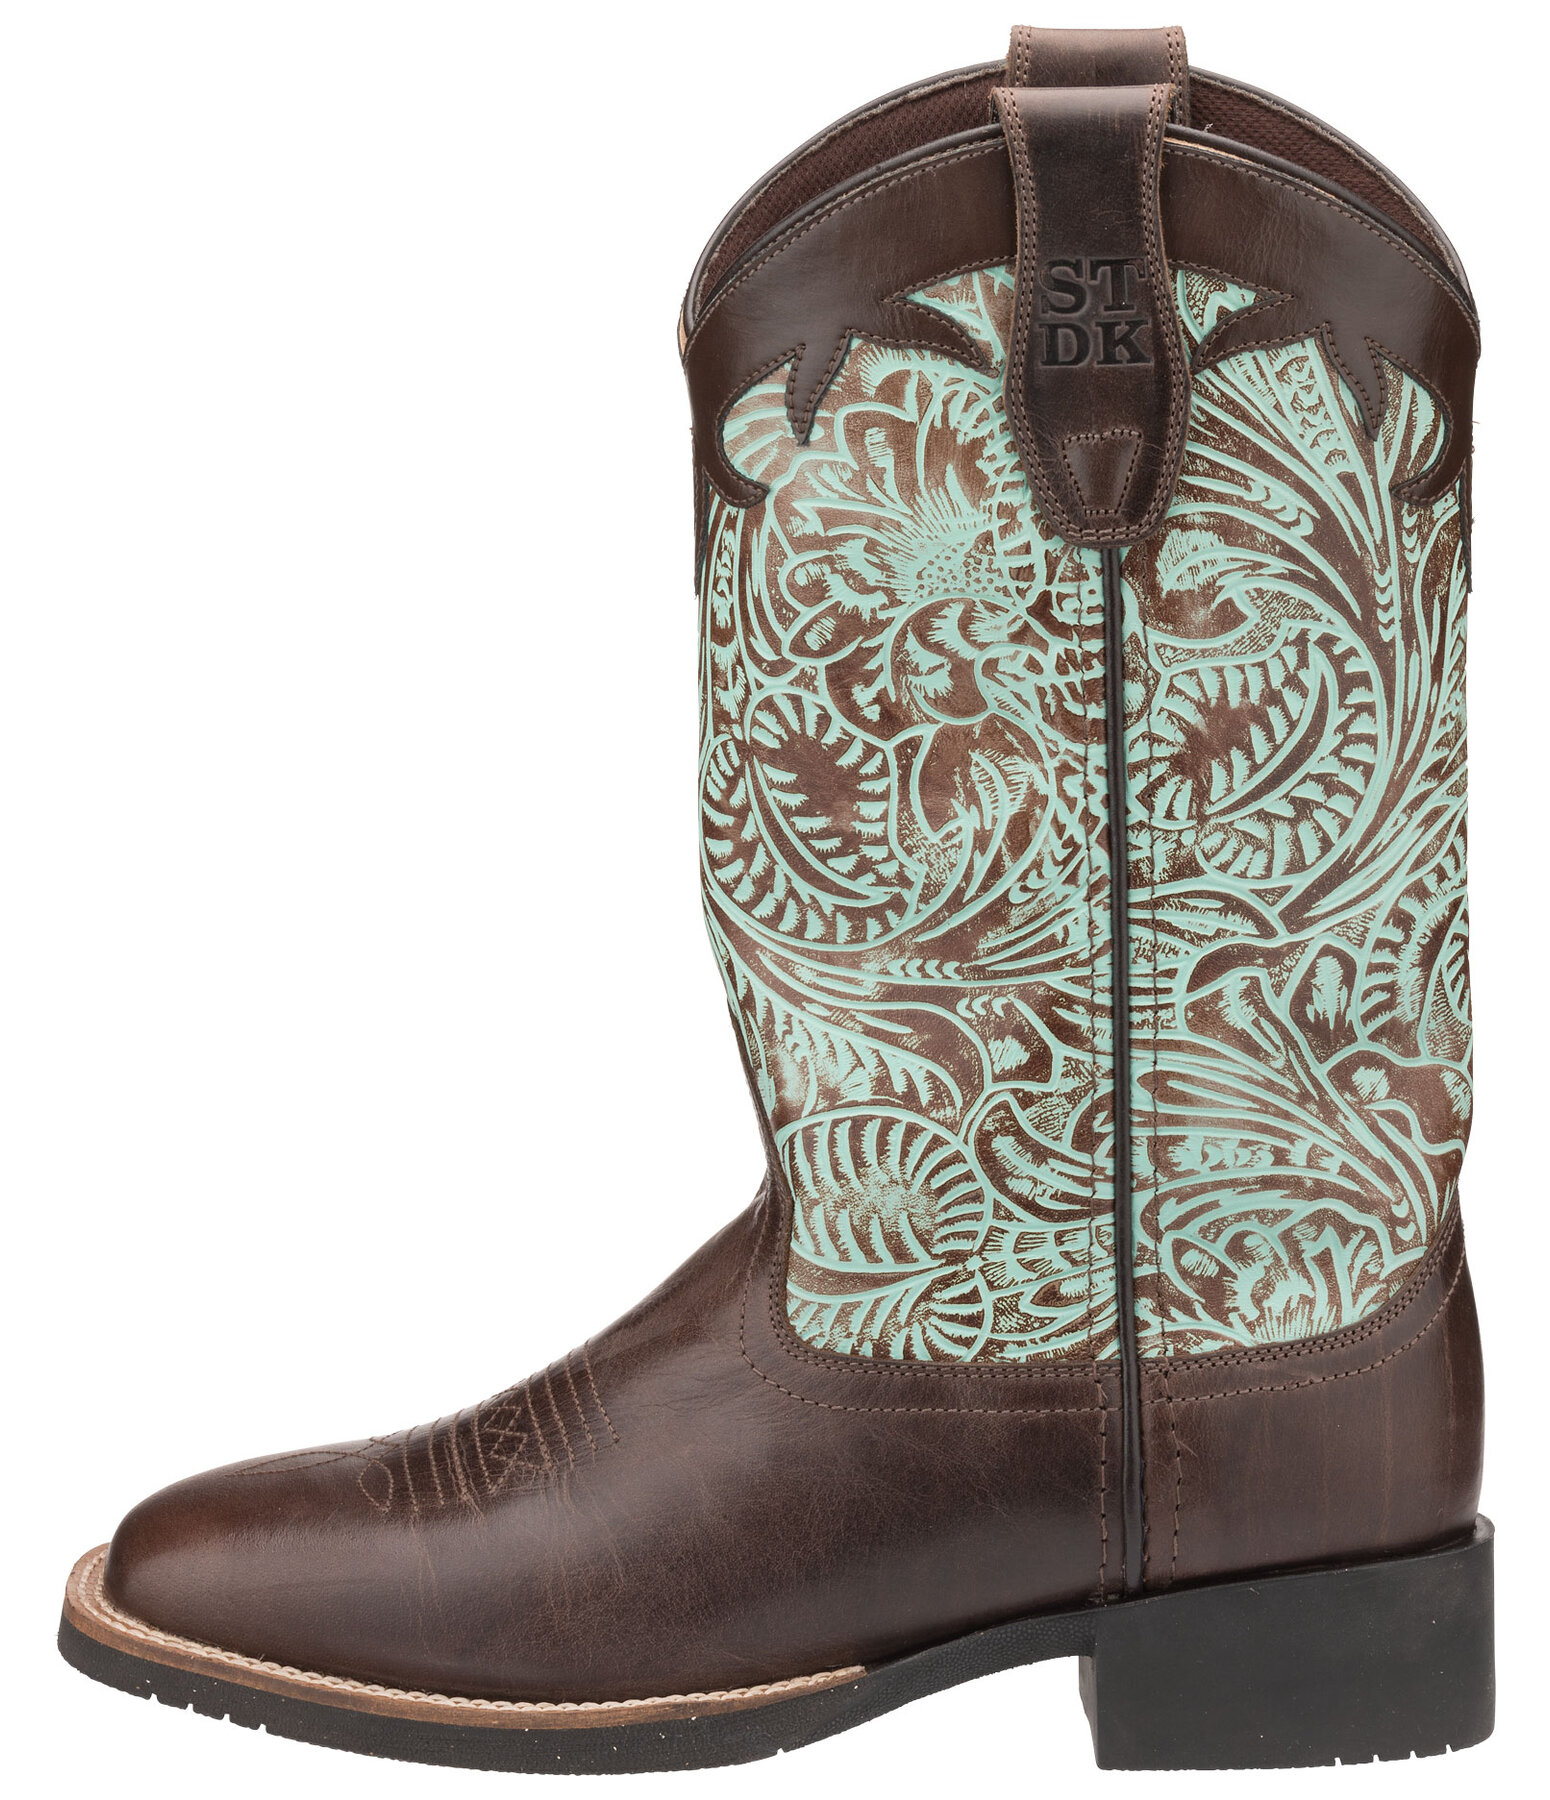 Boots Floral Crush